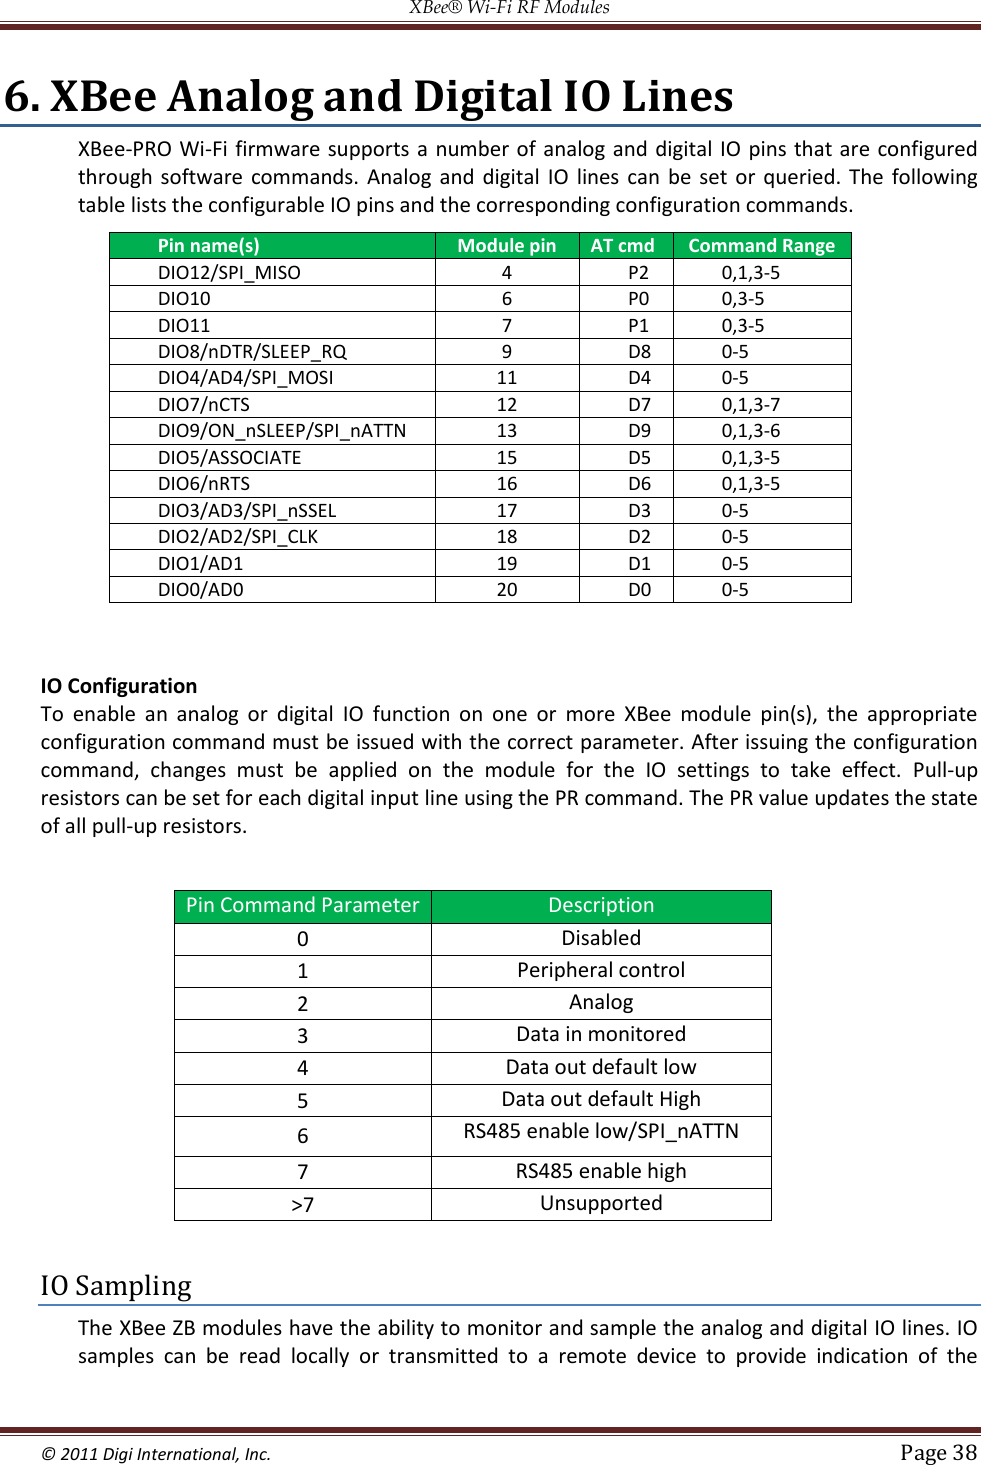 XBee® Wi-Fi RF Modules  © 2011 Digi International, Inc.   Page 38  6. XBee Analog and Digital IO Lines XBee-PRO Wi-Fi  firmware supports a number of analog and digital IO  pins that are  configured through  software  commands. Analog  and  digital  IO  lines  can  be set  or queried. The  following table lists the configurable IO pins and the corresponding configuration commands. Pin name(s) Module pin AT cmd Command Range DIO12/SPI_MISO 4 P2 0,1,3-5 DIO10 6 P0 0,3-5 DIO11 7 P1 0,3-5 DIO8/nDTR/SLEEP_RQ 9 D8 0-5 DIO4/AD4/SPI_MOSI 11 D4 0-5 DIO7/nCTS 12 D7 0,1,3-7 DIO9/ON_nSLEEP/SPI_nATTN 13 D9 0,1,3-6 DIO5/ASSOCIATE 15 D5 0,1,3-5 DIO6/nRTS 16 D6 0,1,3-5 DIO3/AD3/SPI_nSSEL 17 D3 0-5 DIO2/AD2/SPI_CLK 18 D2 0-5 DIO1/AD1 19 D1 0-5 DIO0/AD0 20 D0 0-5  IO Configuration To  enable  an  analog  or  digital  IO  function  on  one  or  more  XBee  module  pin(s),  the  appropriate configuration command must be issued with the correct parameter. After issuing the configuration command,  changes  must  be  applied  on  the  module  for  the  IO  settings  to  take  effect.  Pull-up resistors can be set for each digital input line using the PR command. The PR value updates the state of all pull-up resistors.  Pin Command Parameter Description 0 Disabled 1 Peripheral control 2 Analog 3 Data in monitored 4 Data out default low 5 Data out default High 6 RS485 enable low/SPI_nATTN 7 RS485 enable high &gt;7 Unsupported  IO Sampling The XBee ZB modules have the ability to monitor and sample the analog and digital IO lines. IO samples  can  be  read  locally  or  transmitted  to  a  remote  device  to  provide  indication  of  the 